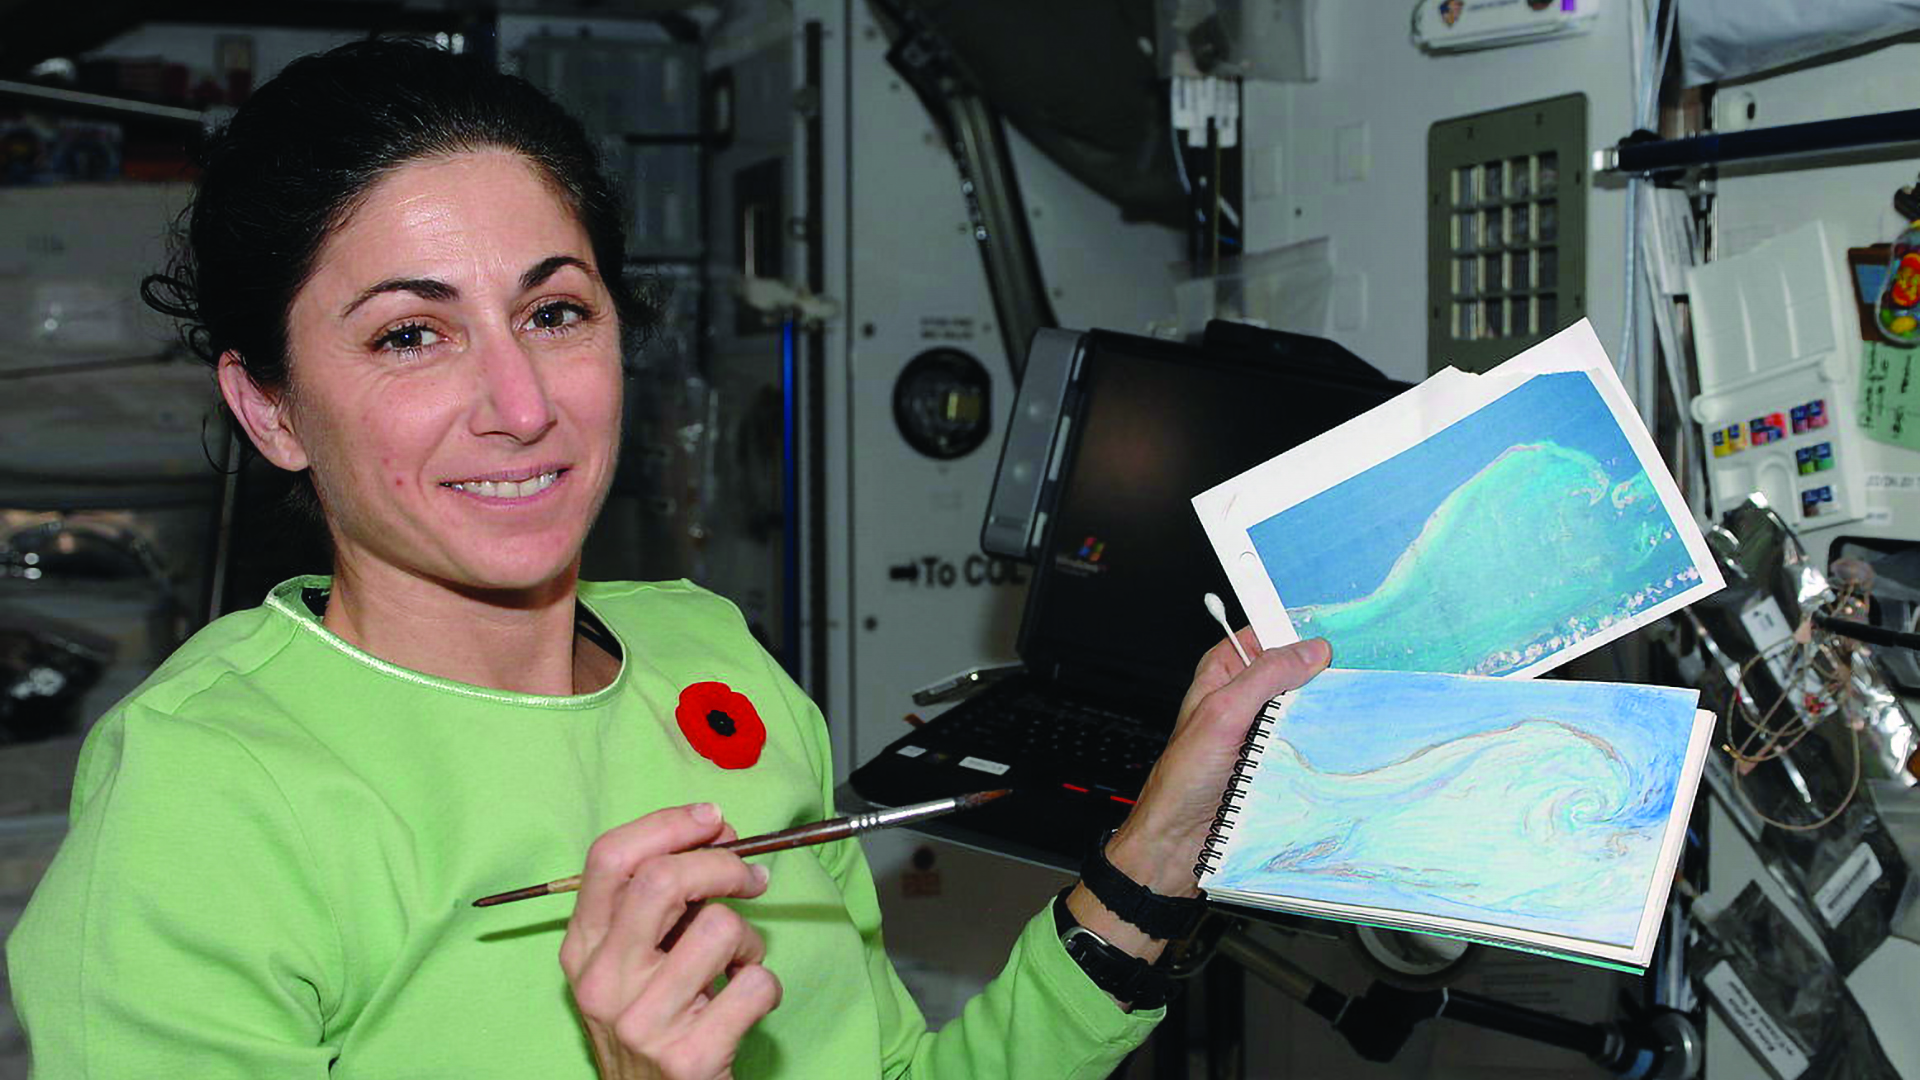 A woman with dark hair and bright green sweatshirt shows off watercolor paintings in the International Space Station